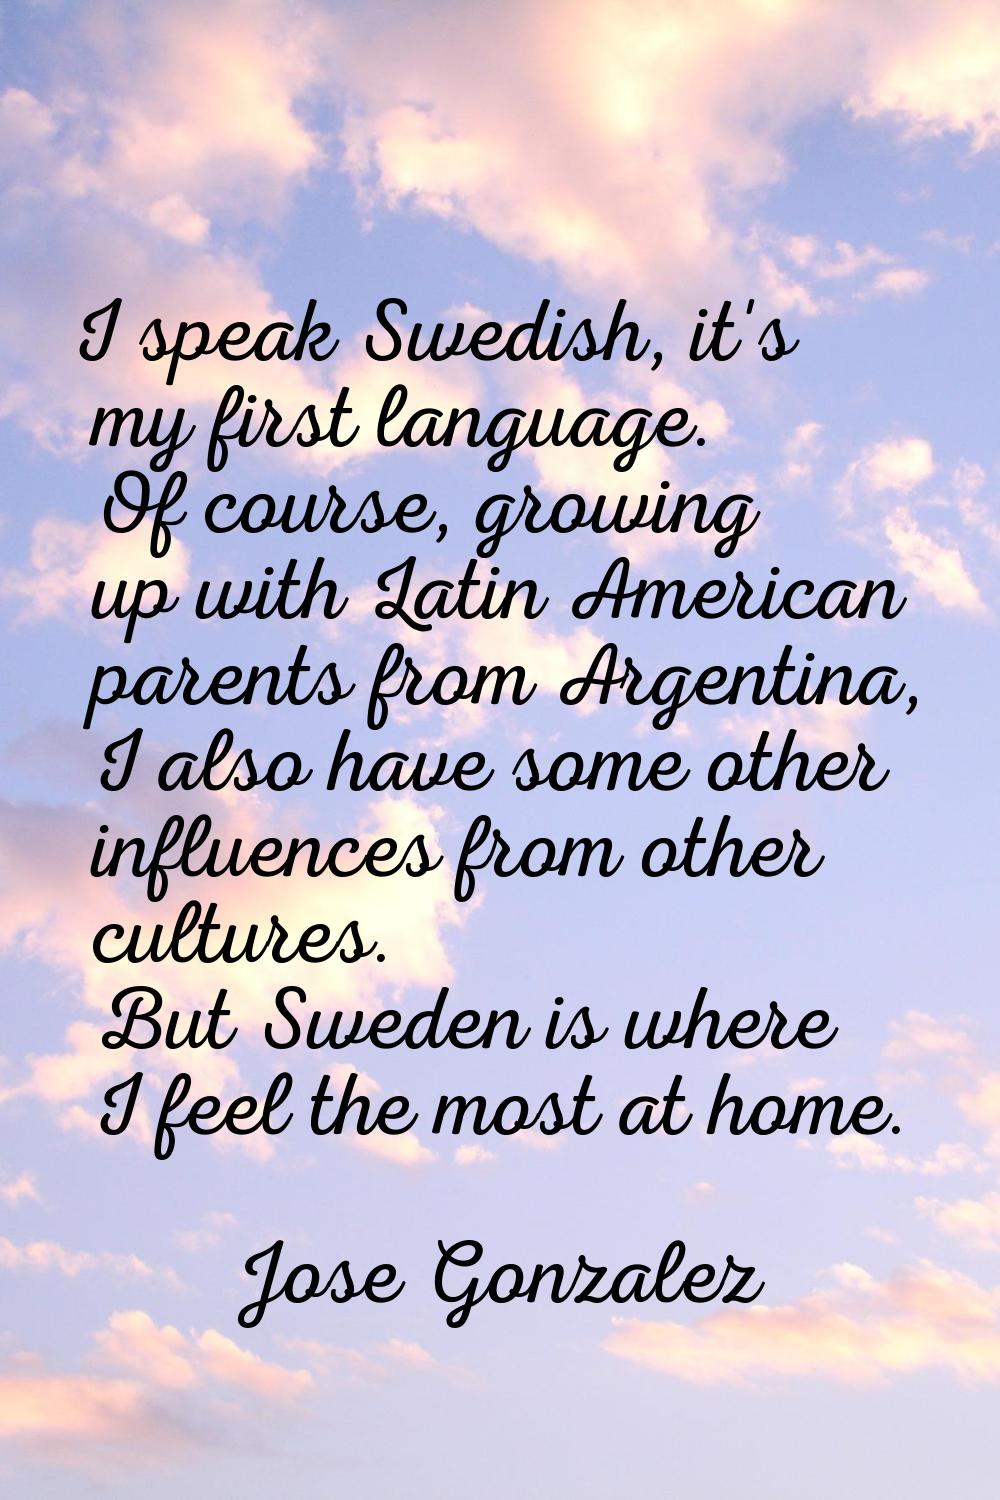 I speak Swedish, it's my first language. Of course, growing up with Latin American parents from Arg